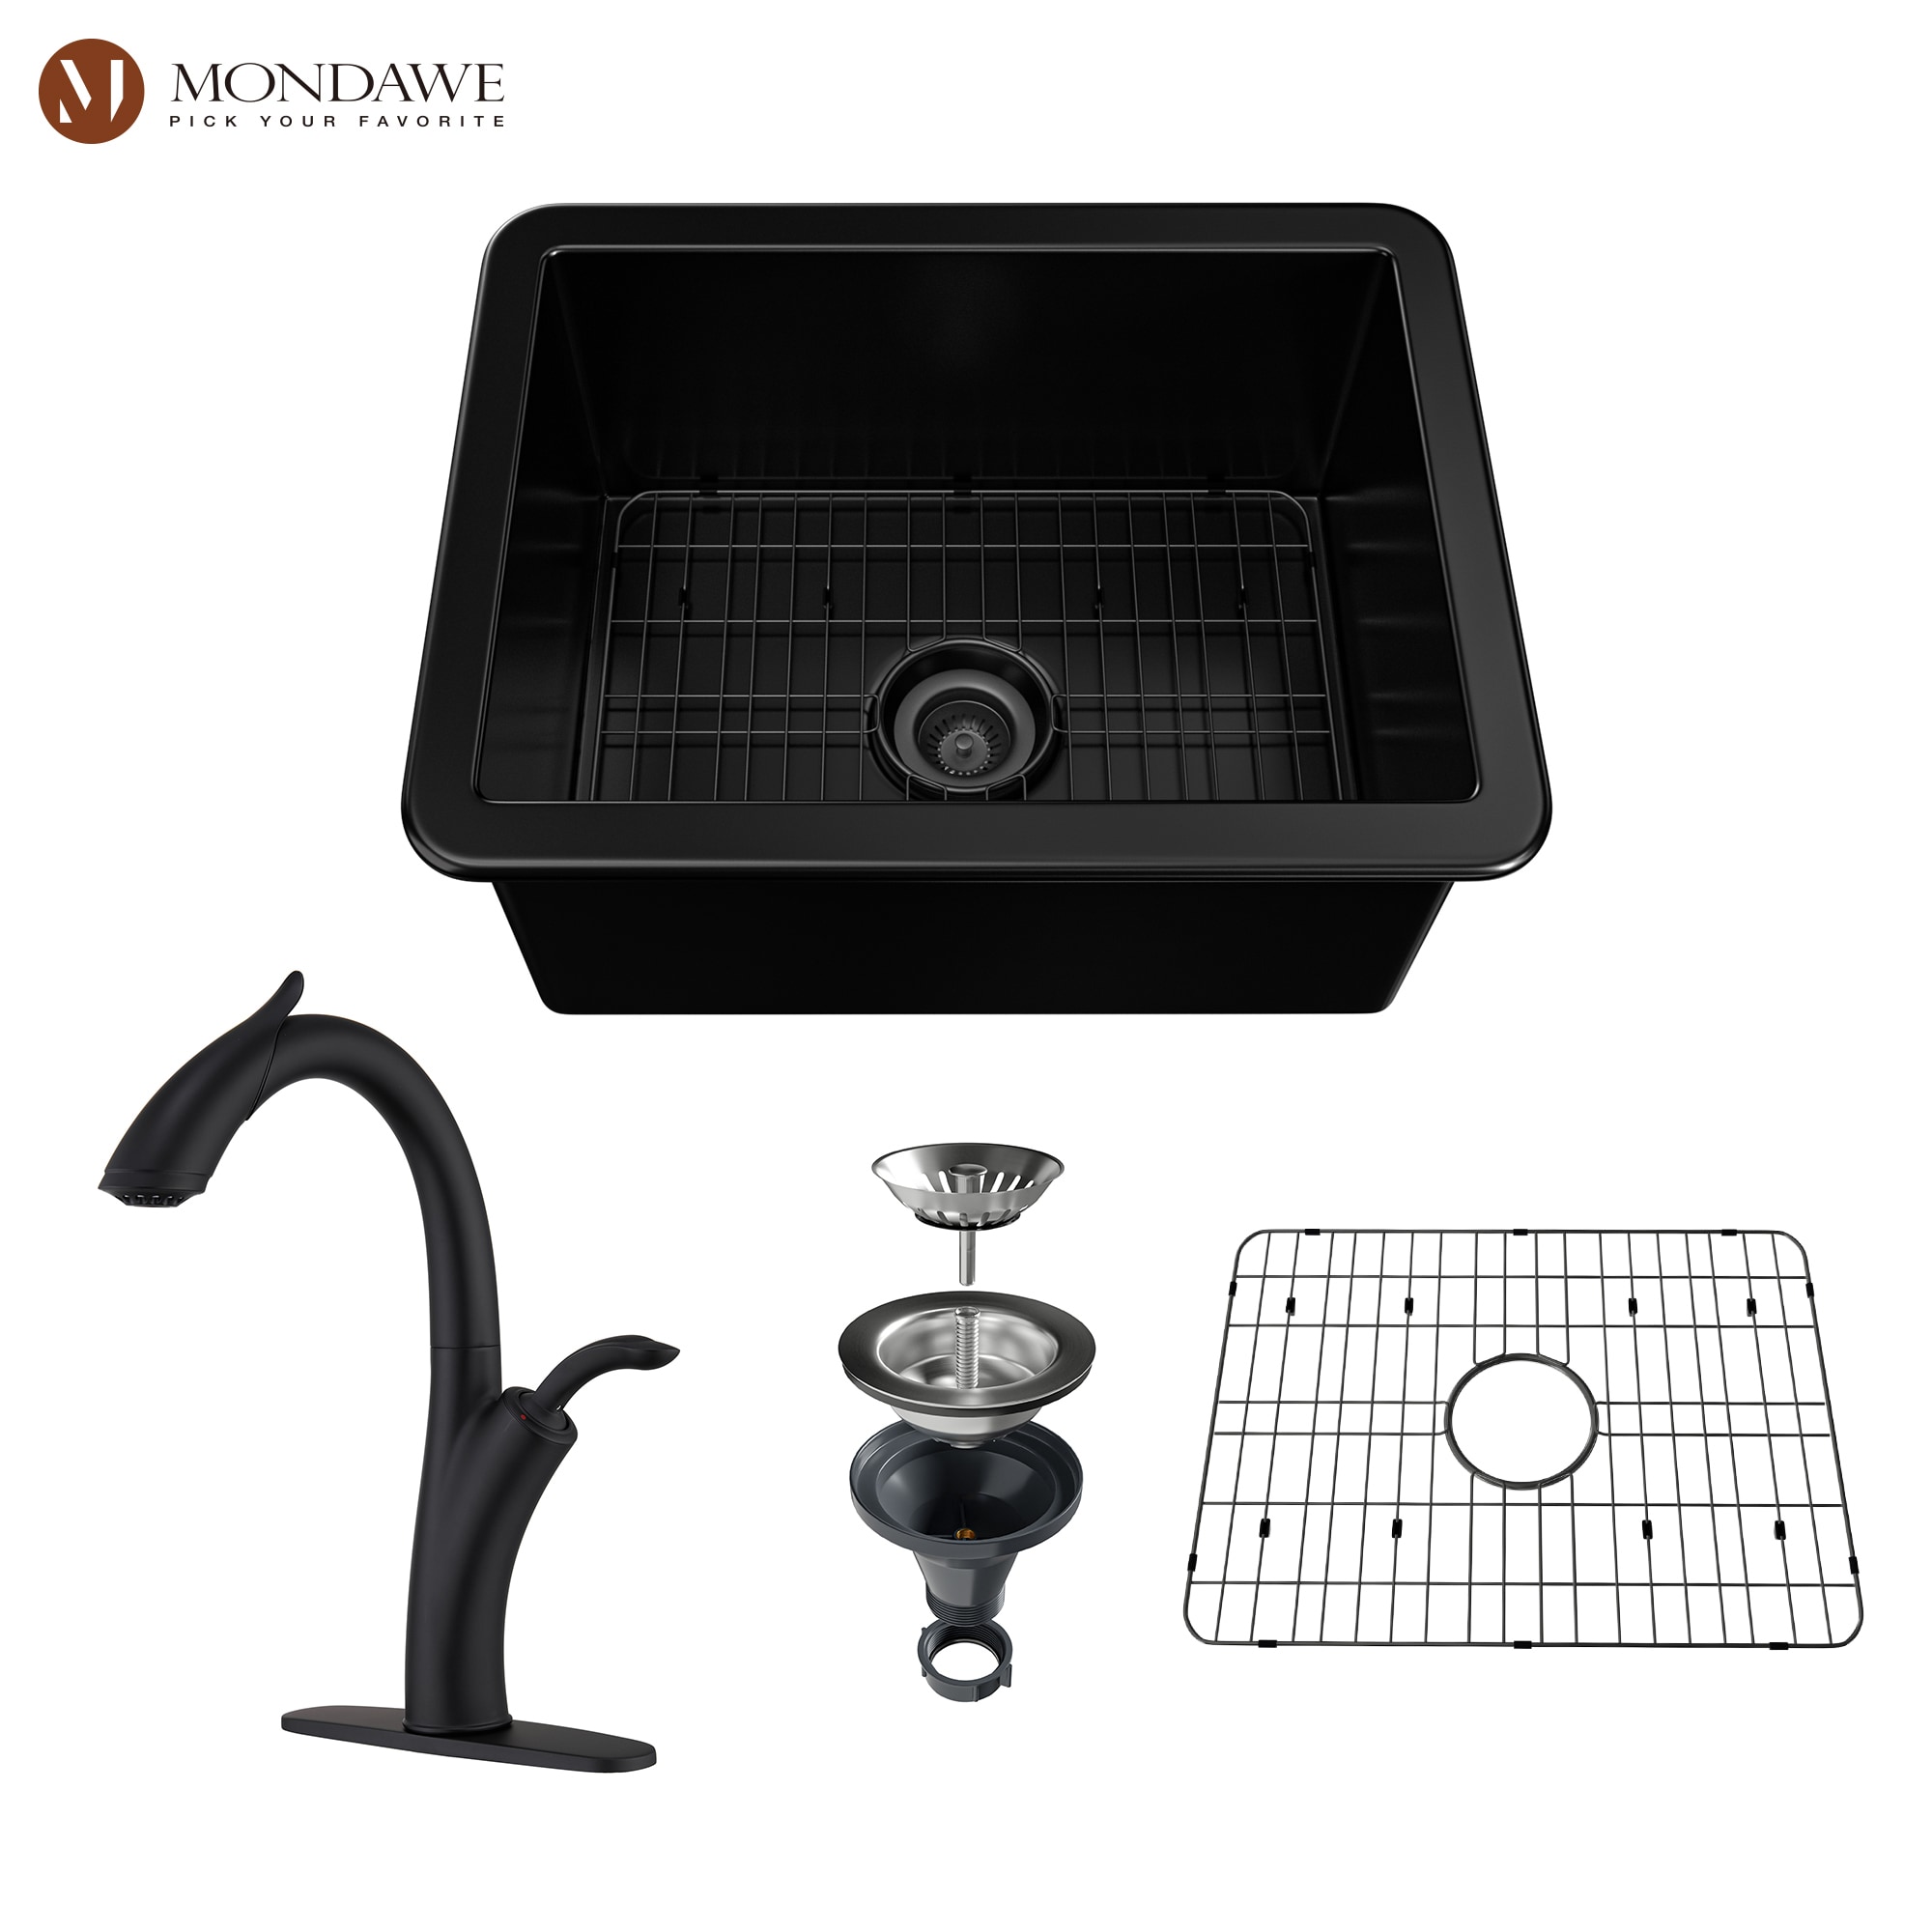 CASAINC Black Fireclay 30 in. Single Bowl Farmhouse Apron Kitchen Sink with Sprayer Kitchen Faucet and Accessories, 30 in. Matte Black Fireclay